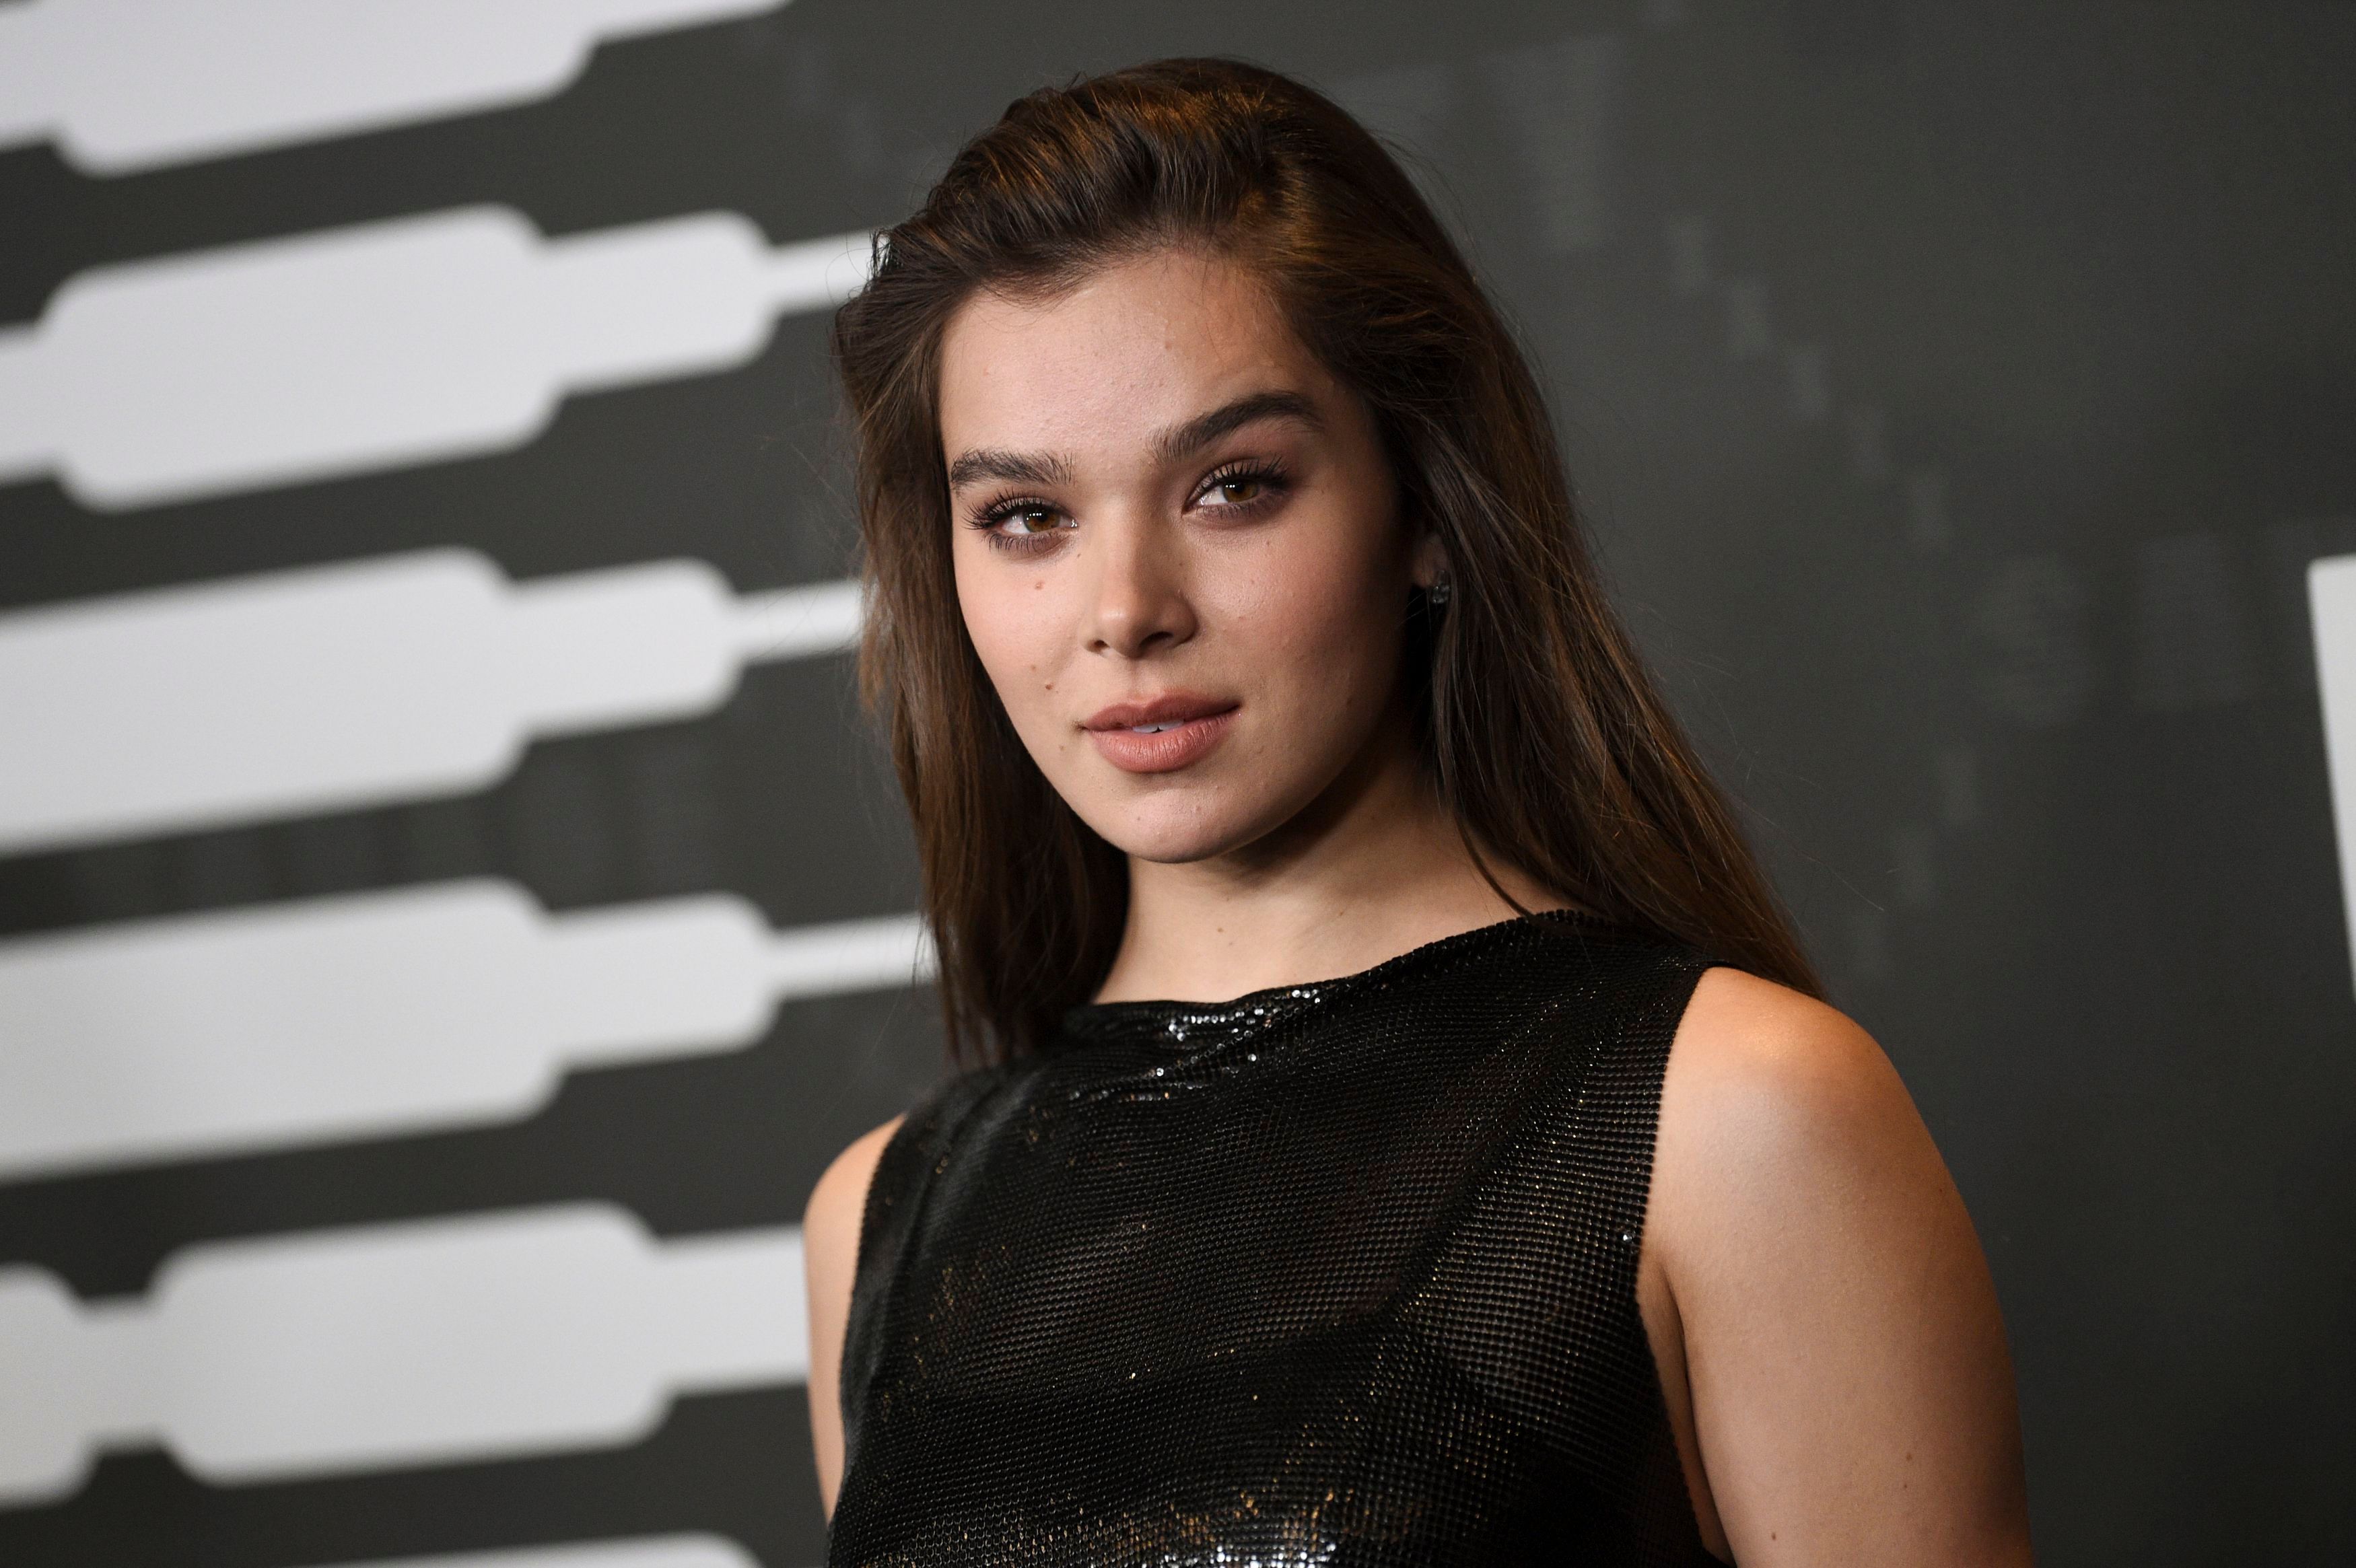  Hailee Steinfeld HQ Background Wallpapers